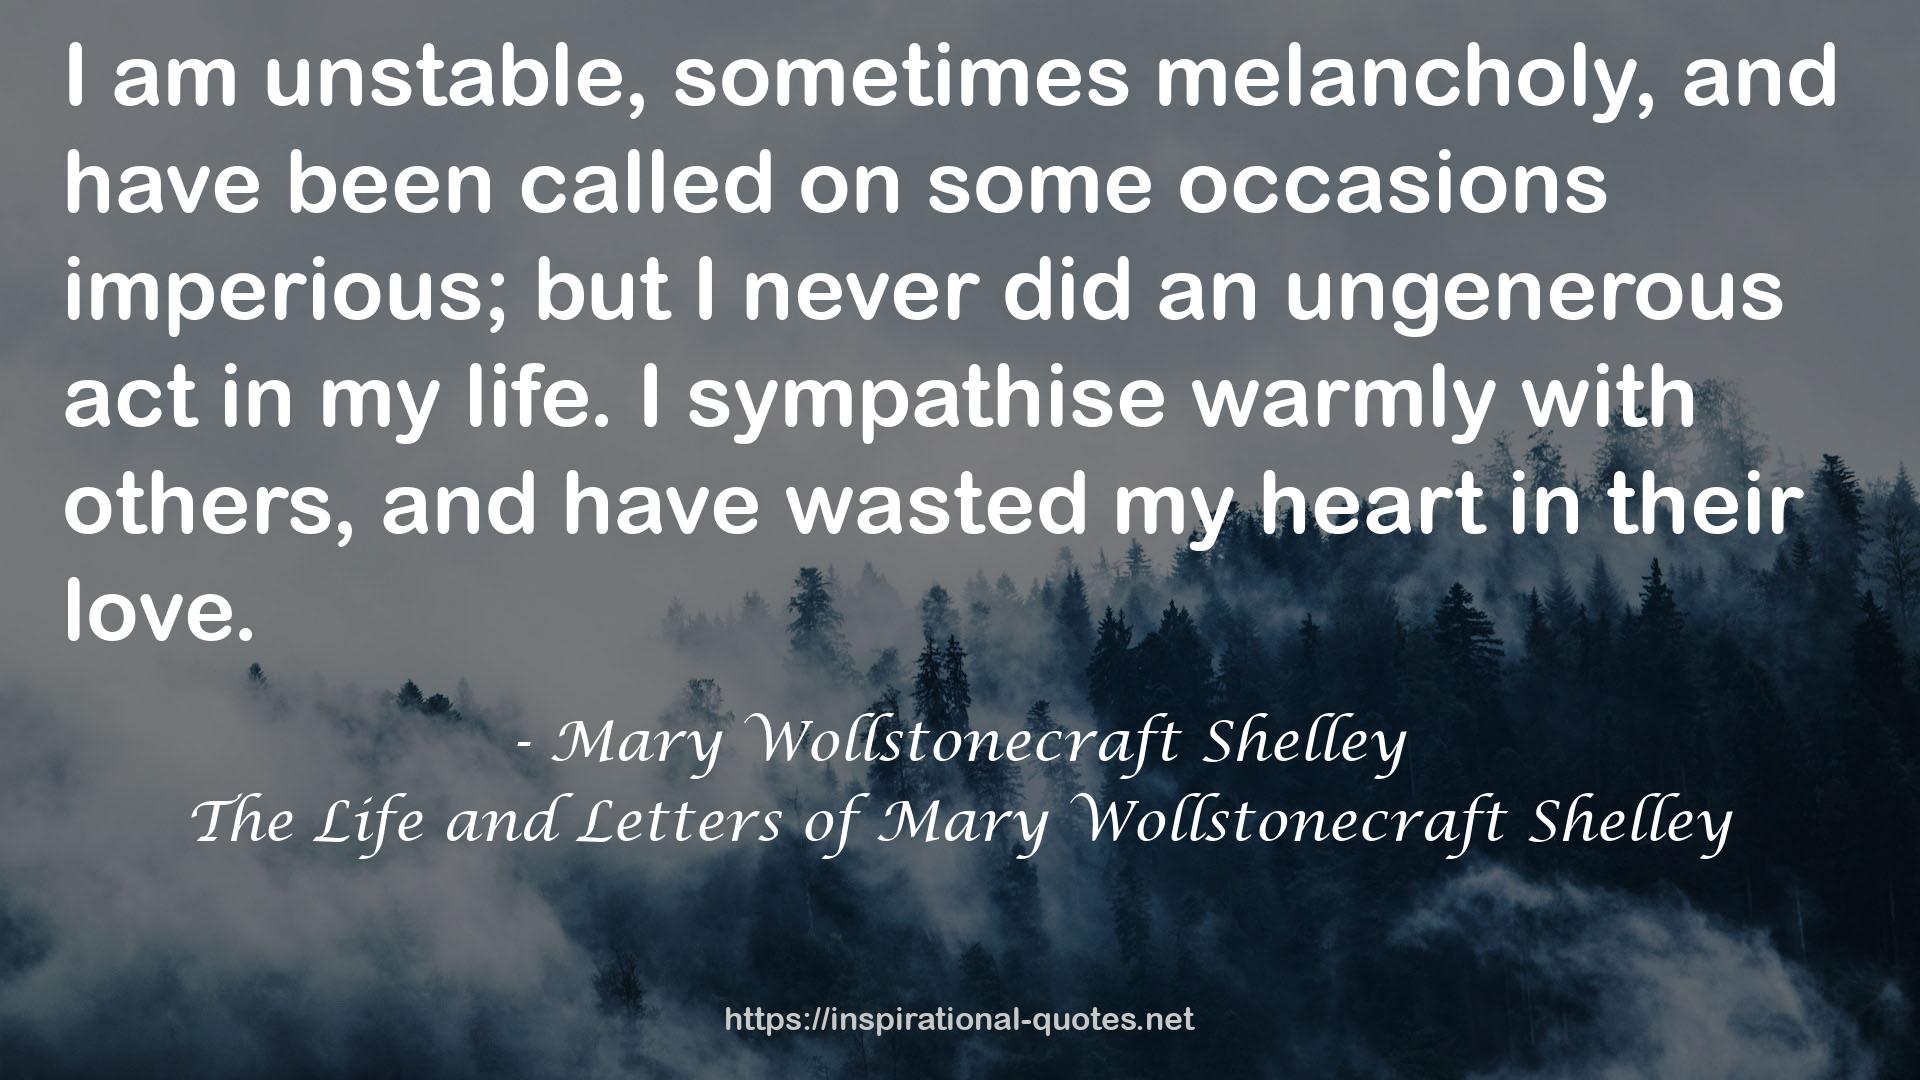 The Life and Letters of Mary Wollstonecraft Shelley QUOTES